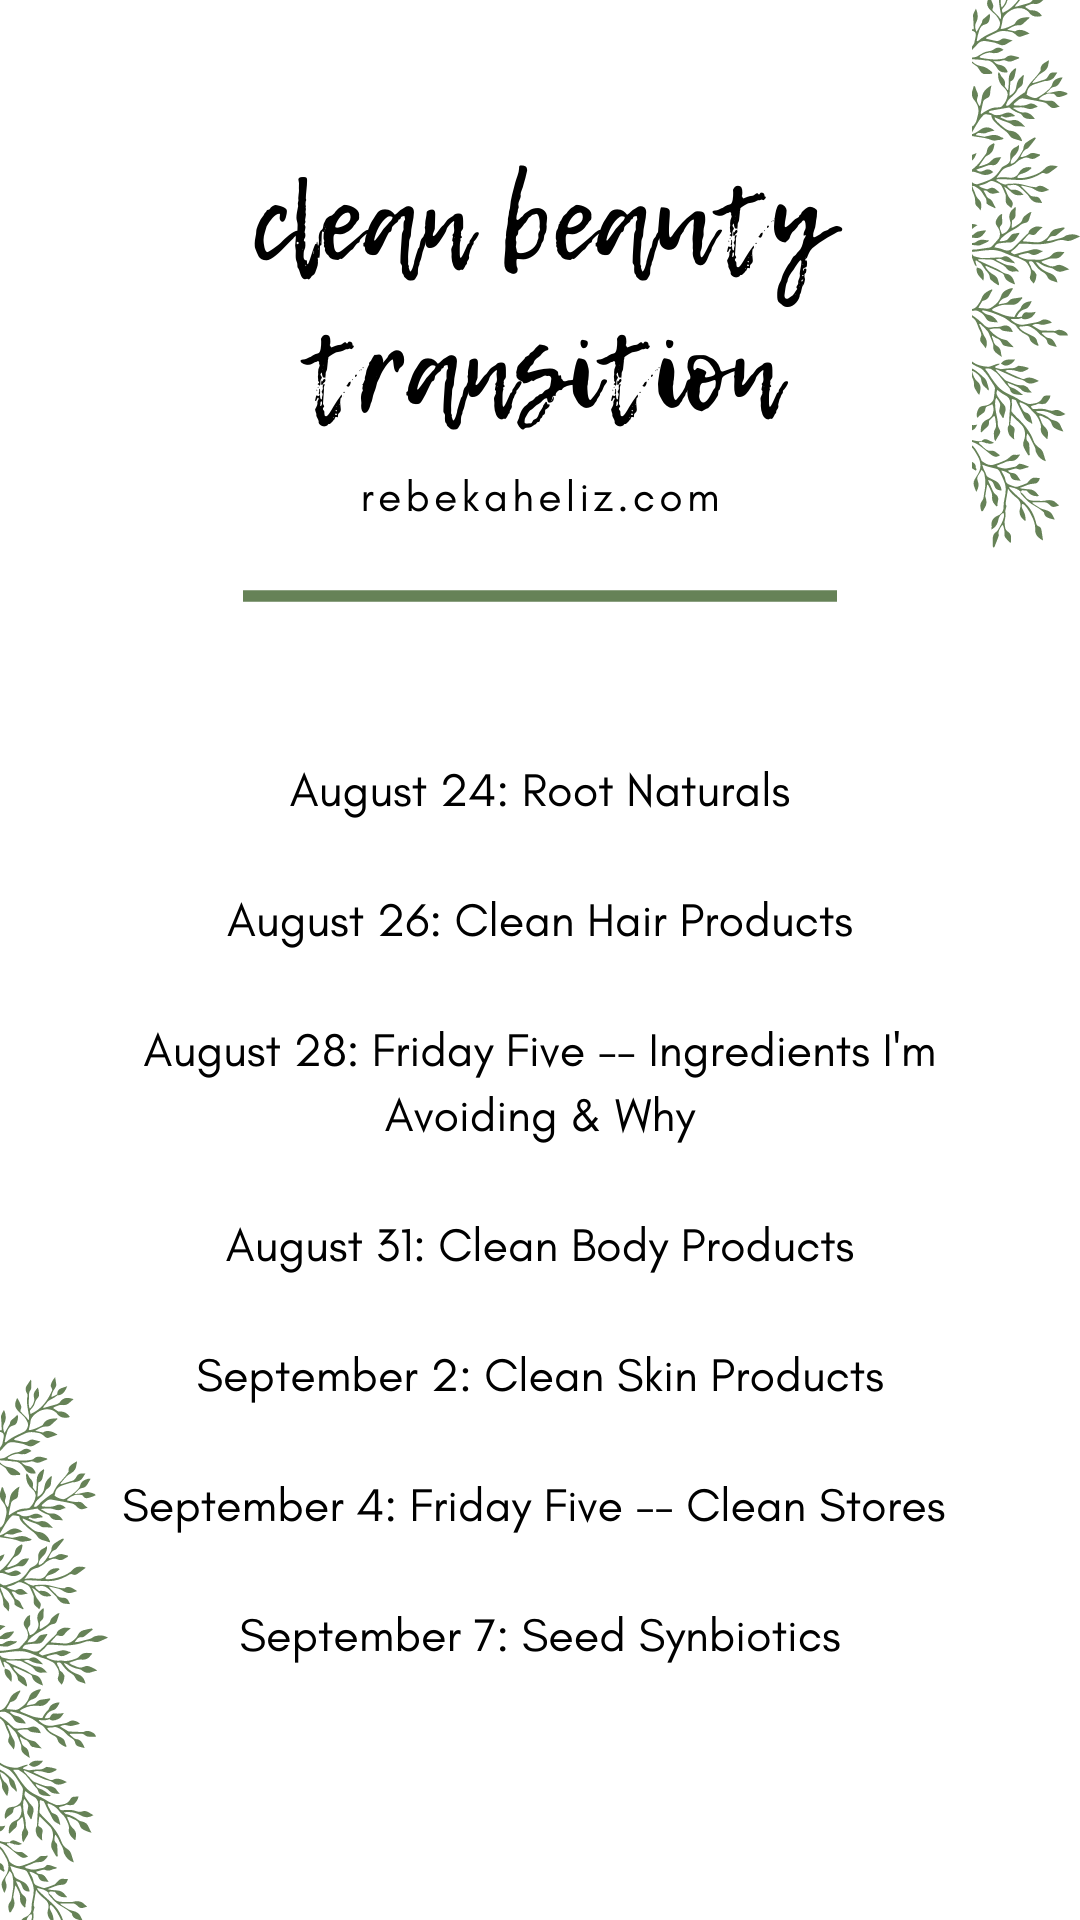 clean beauty, clean skincare, skincare, haircare, beauty products